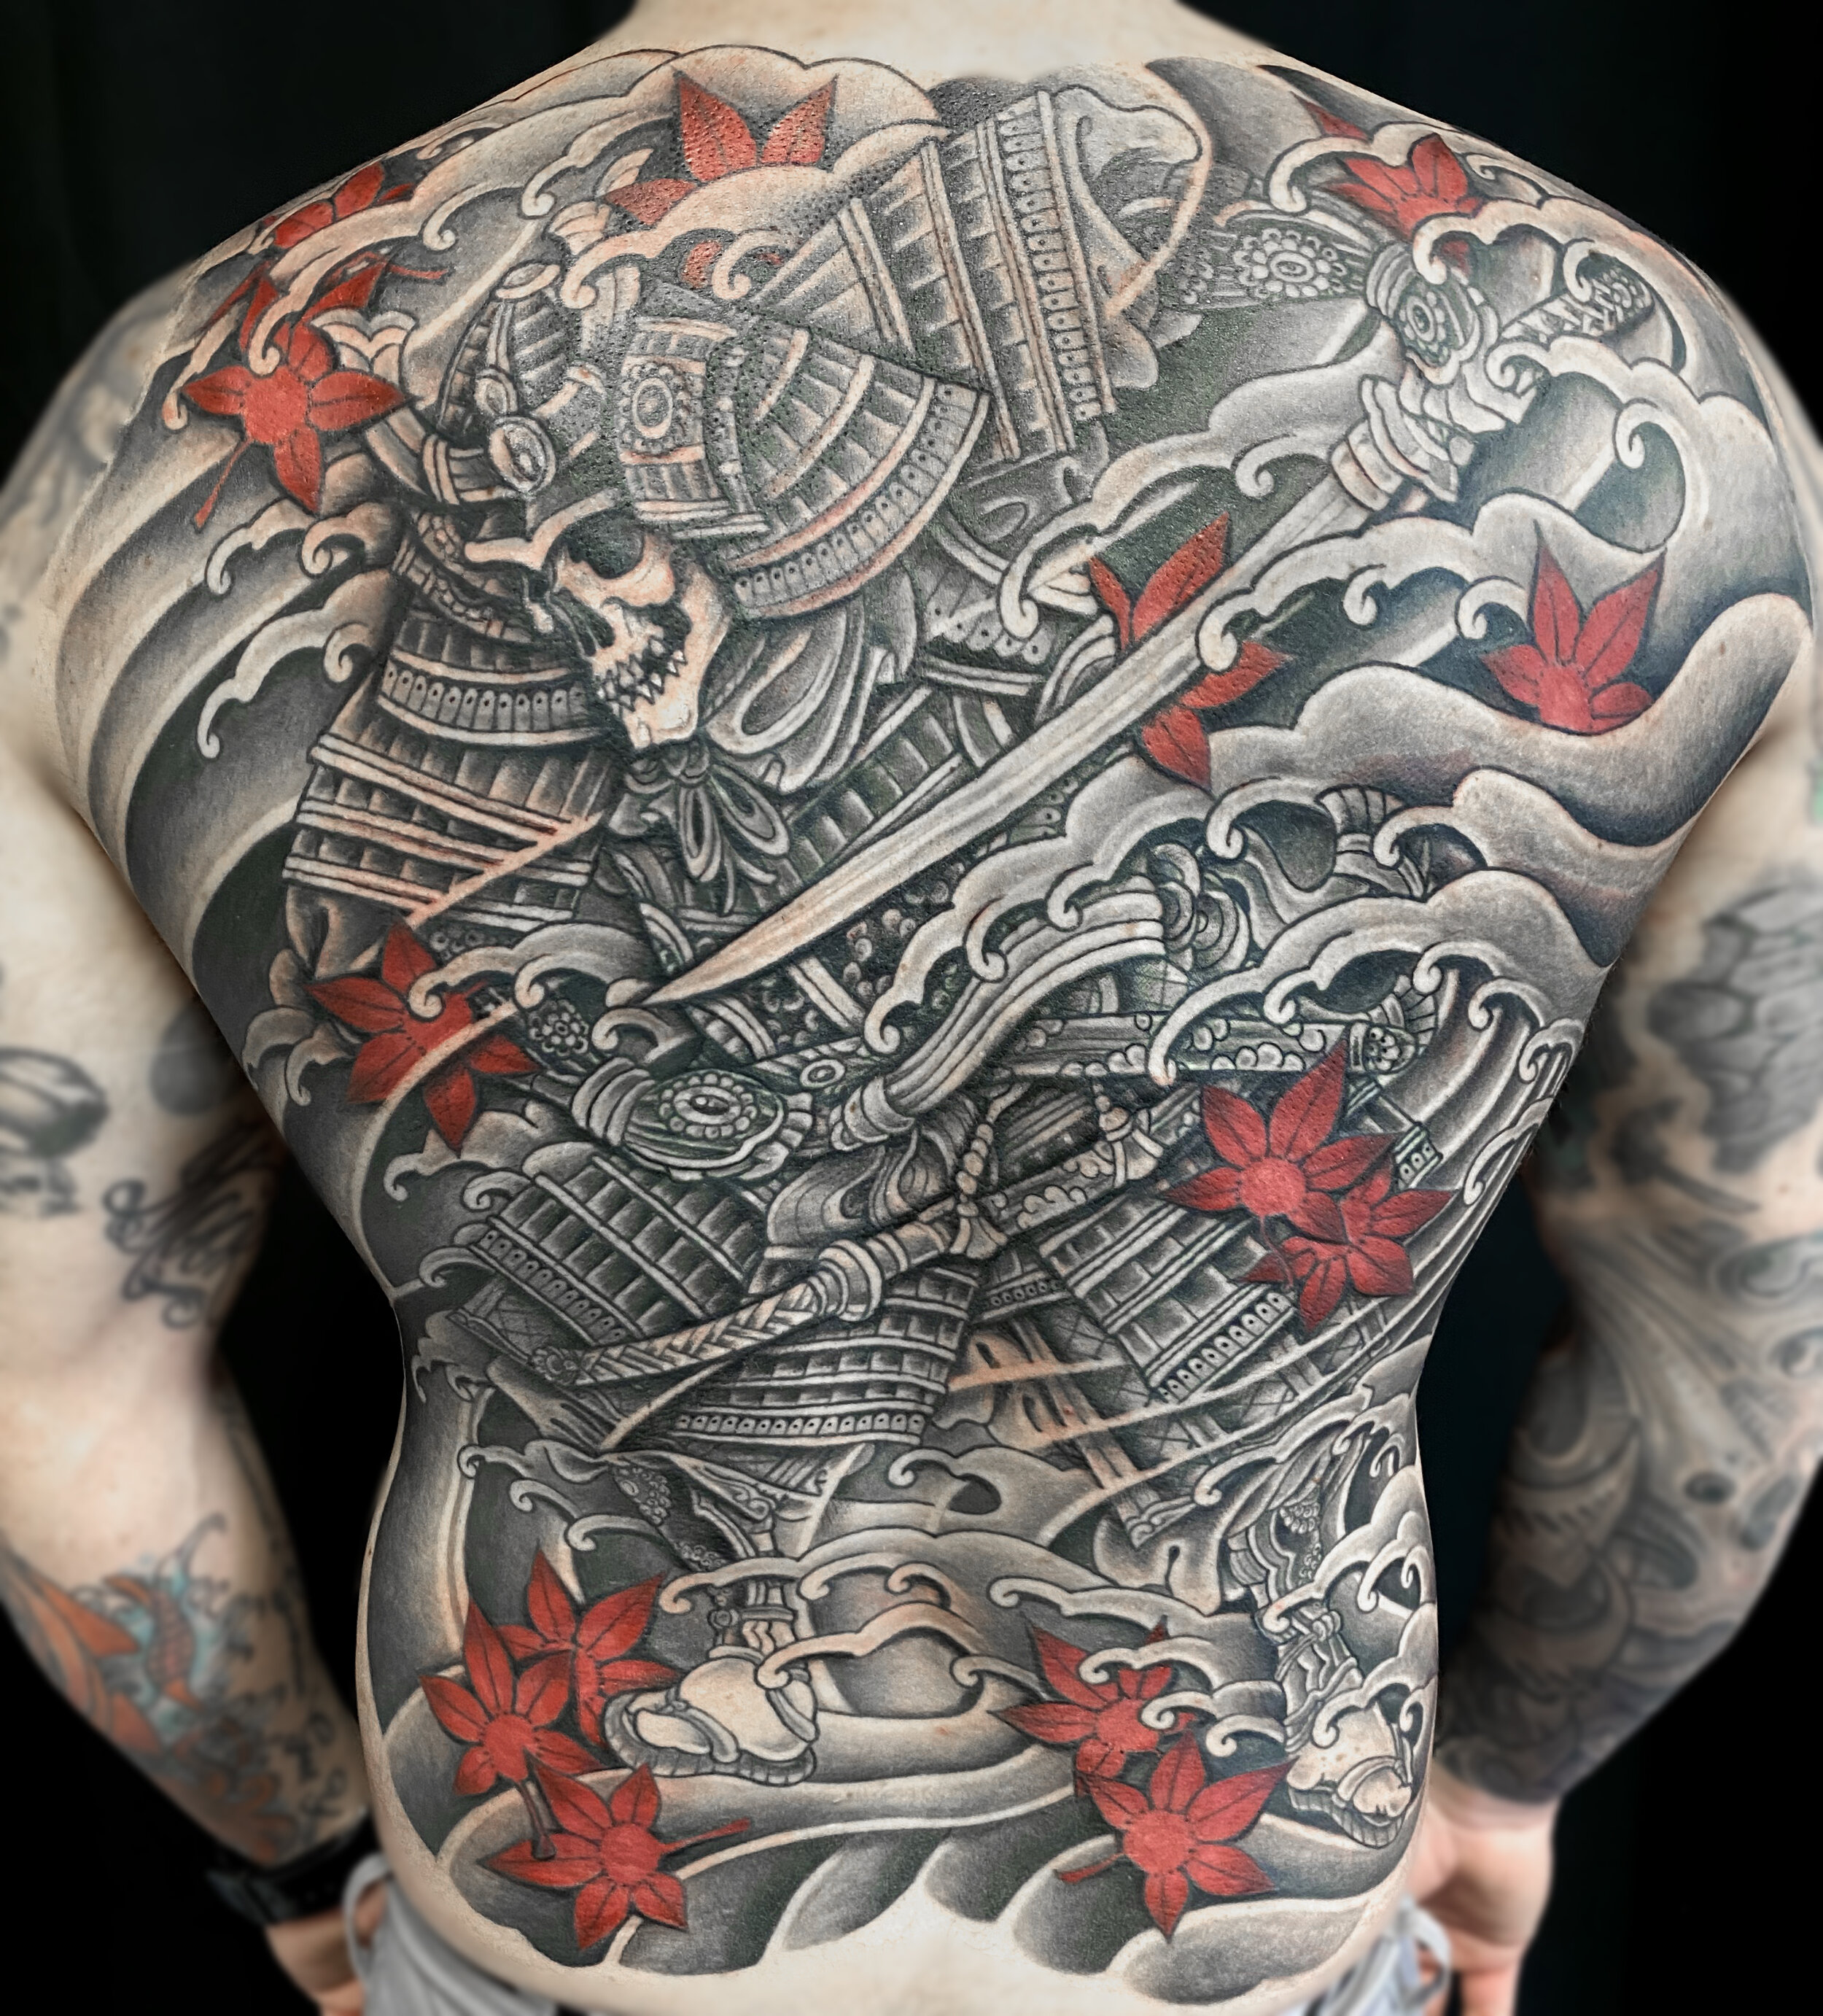 100 Amazing Japanese Tattoos by Some of the Worlds Best Artists